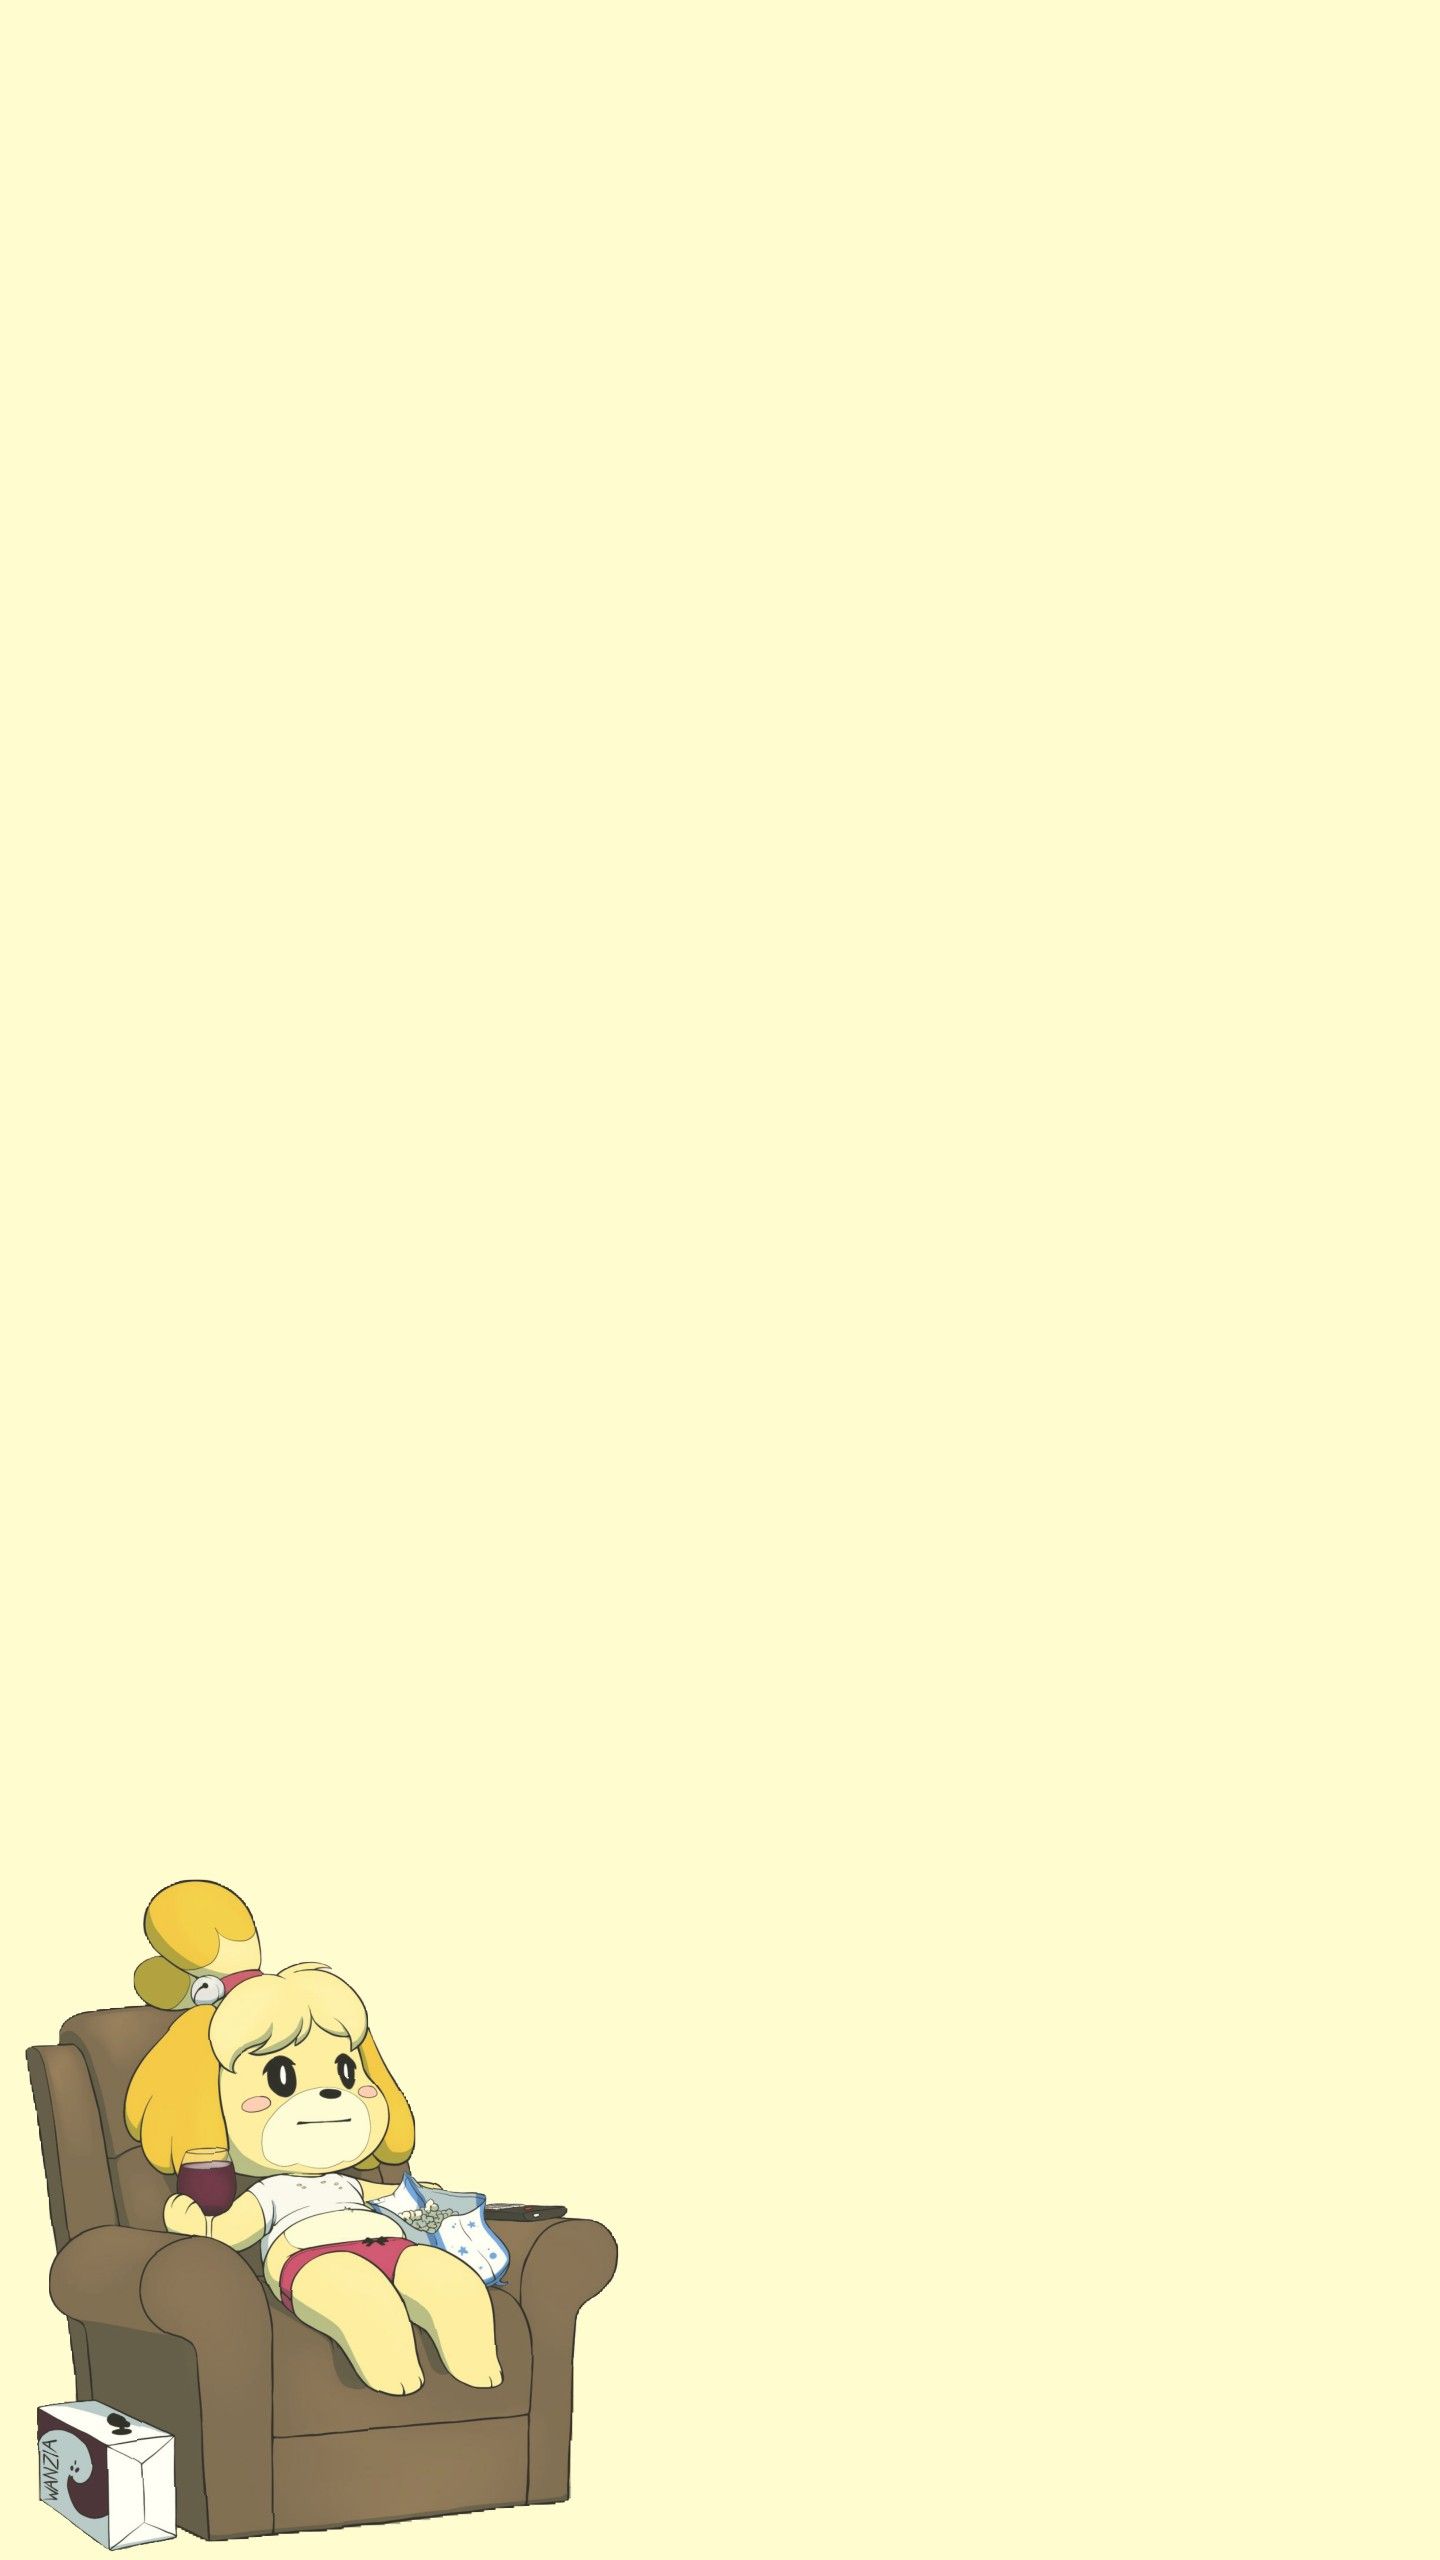 Isabelle wallpaper! Credit to YellowHellion for the original